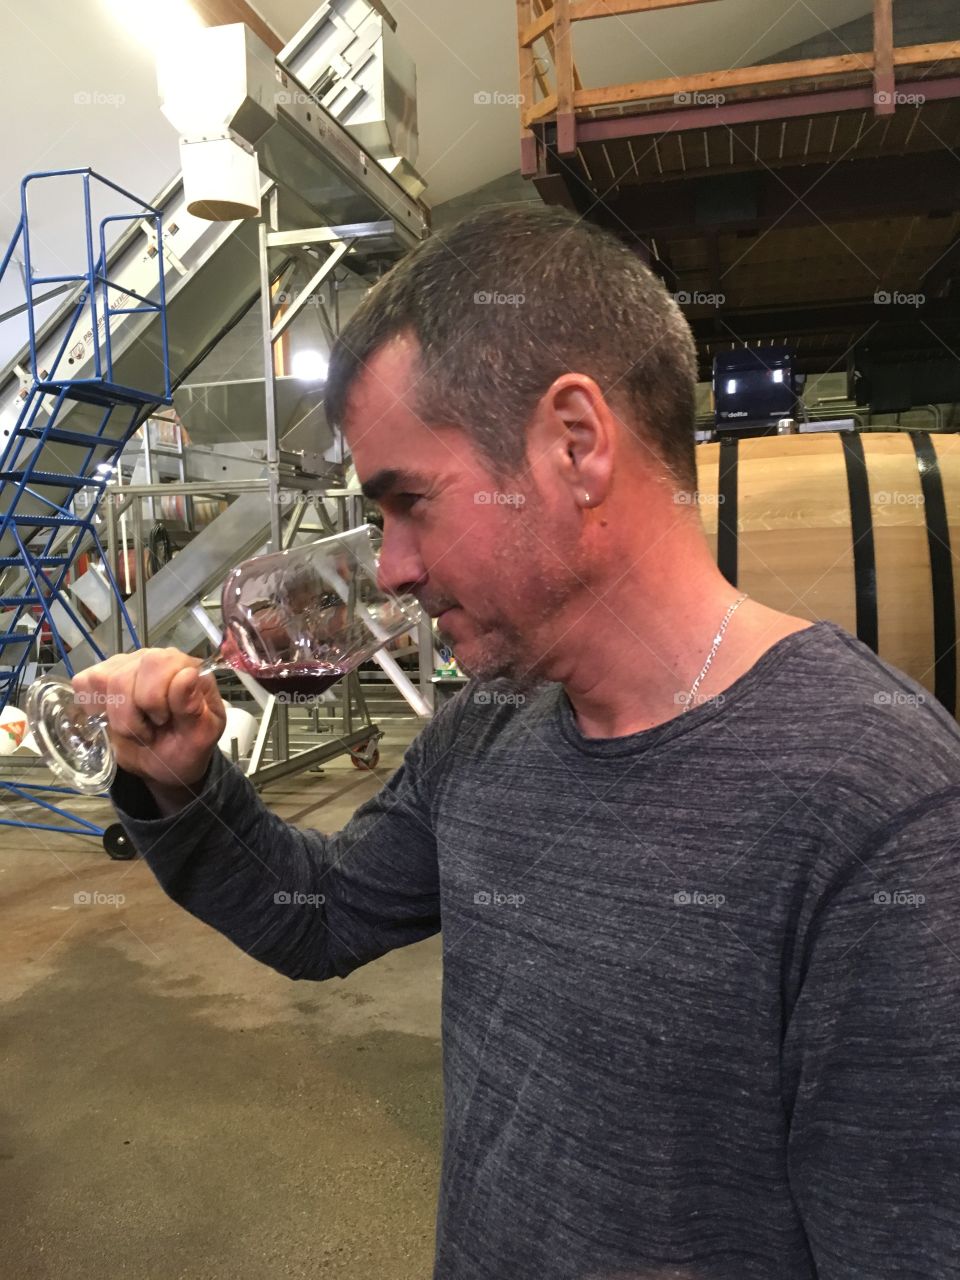 Wine tasting from the barrel